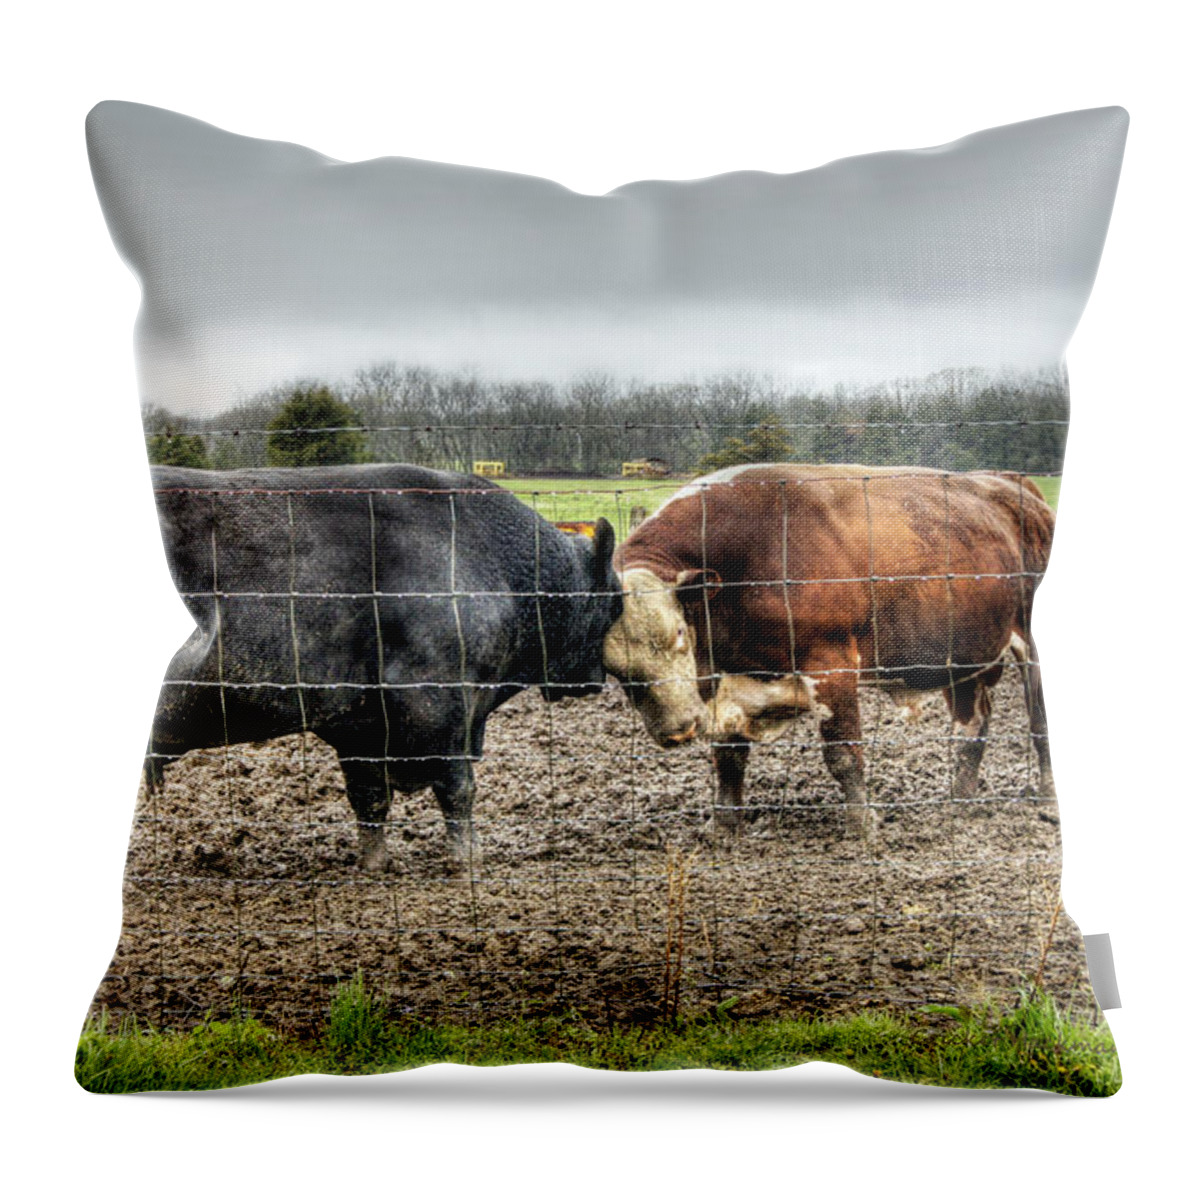 Bull Throw Pillow featuring the photograph Head to Head by Cricket Hackmann